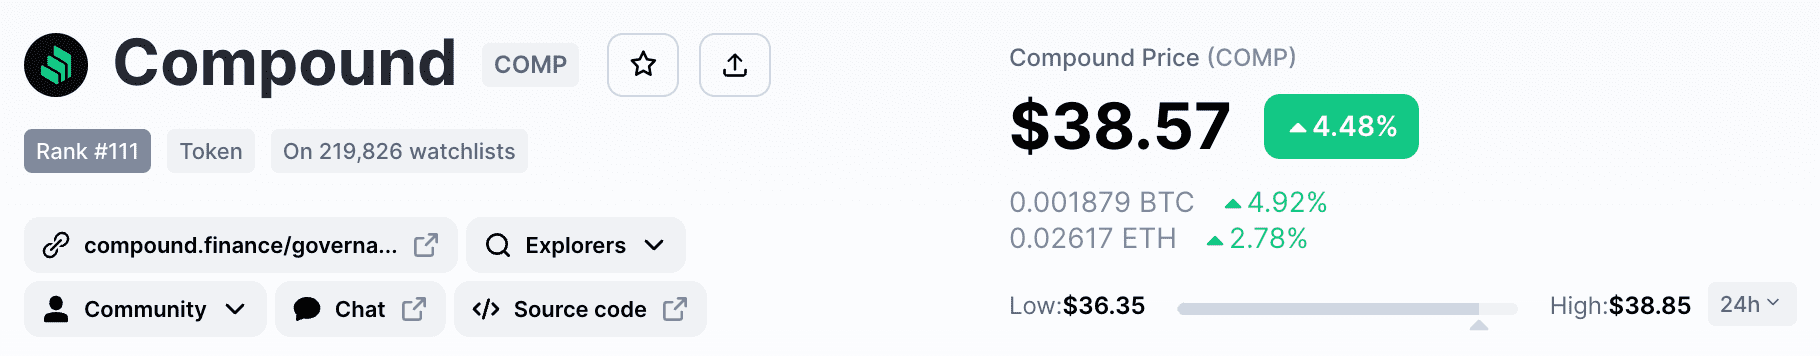 compound COMP the best DeFi crypto